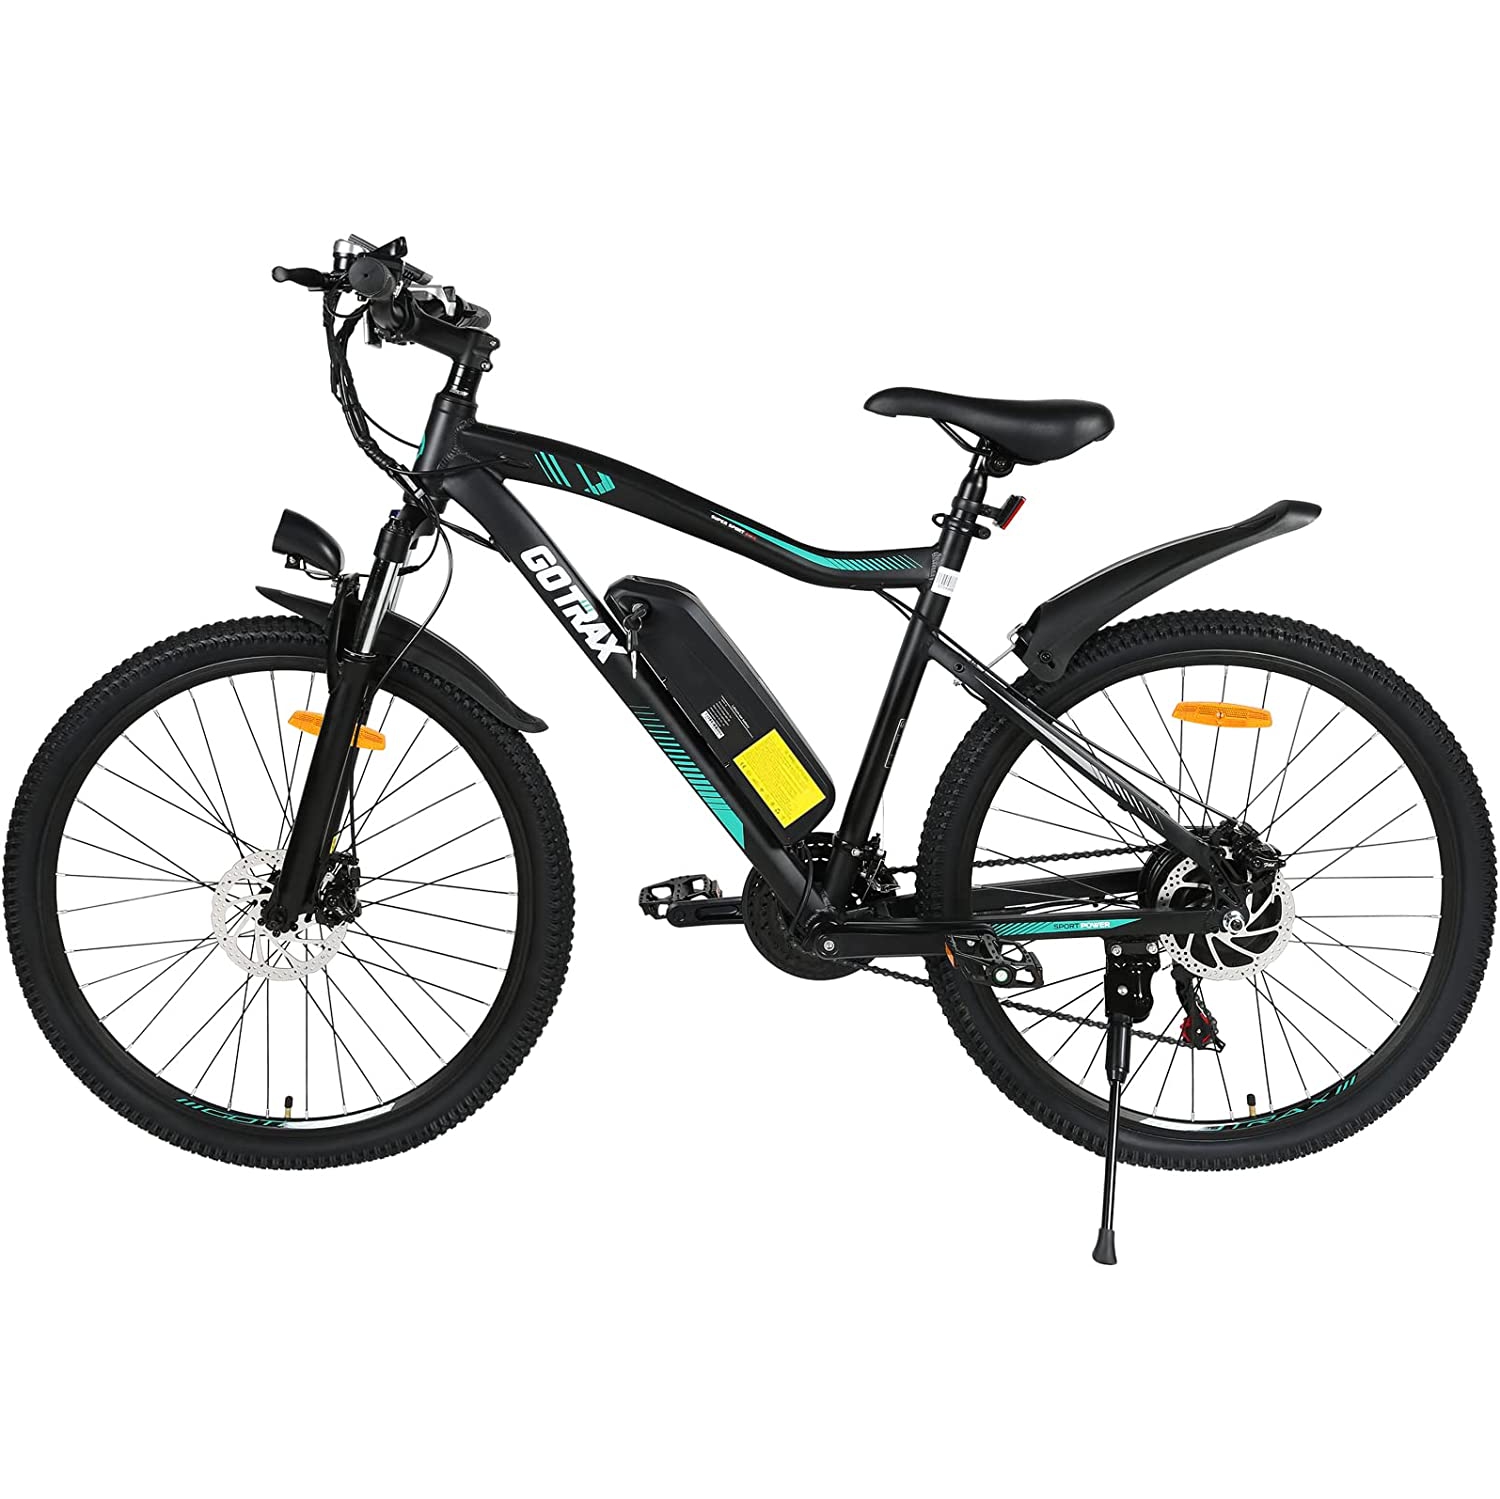 (OPEN BOX) Gotrax EBE3 27.5" Electric Bike, 80Wh Removable Battery, 32km/h Power by 500w Motor, Shimano 21 Speed Gears, Suspension Fork, Lightweight Alloy Frame, Fenders - BLACK